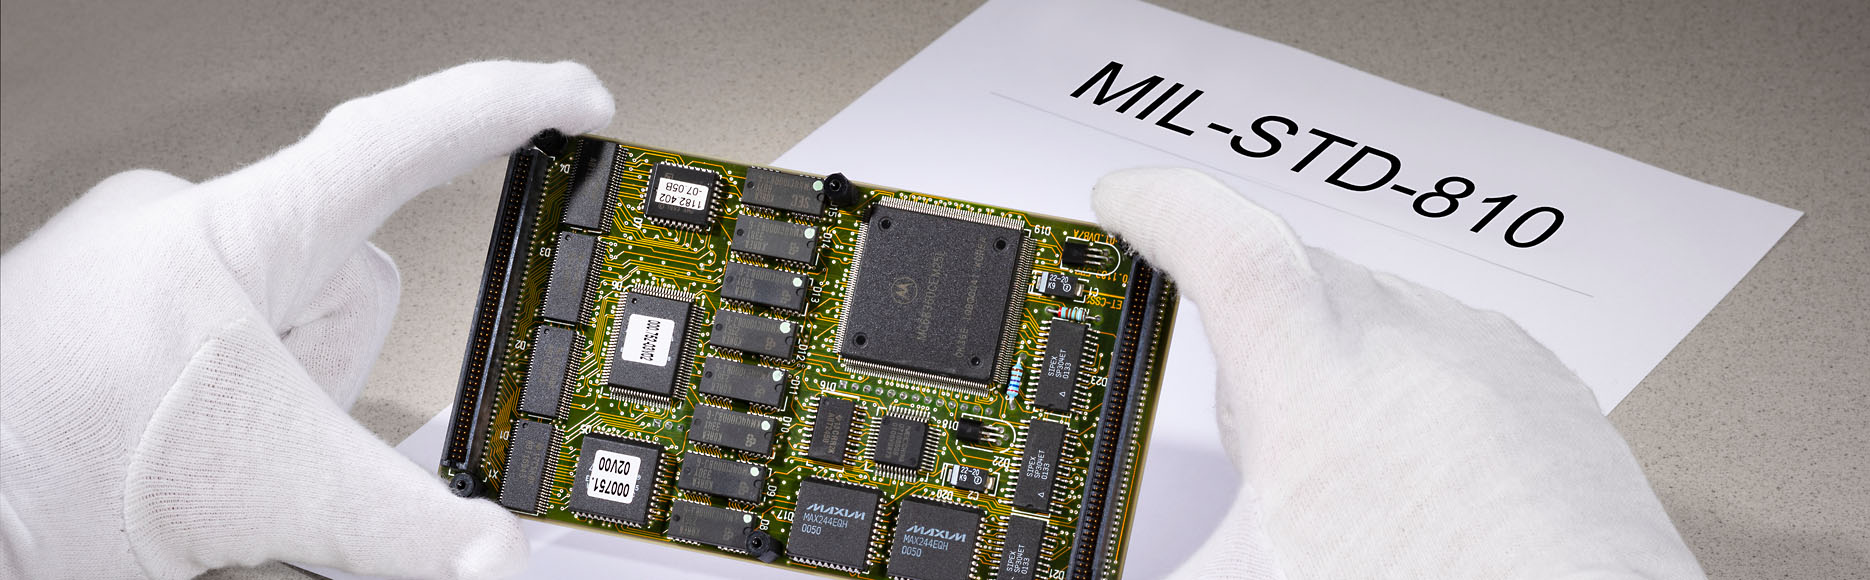 Person wearing gloves holding circuit board in hand. “MIL-STD-810” can be read printed on a document